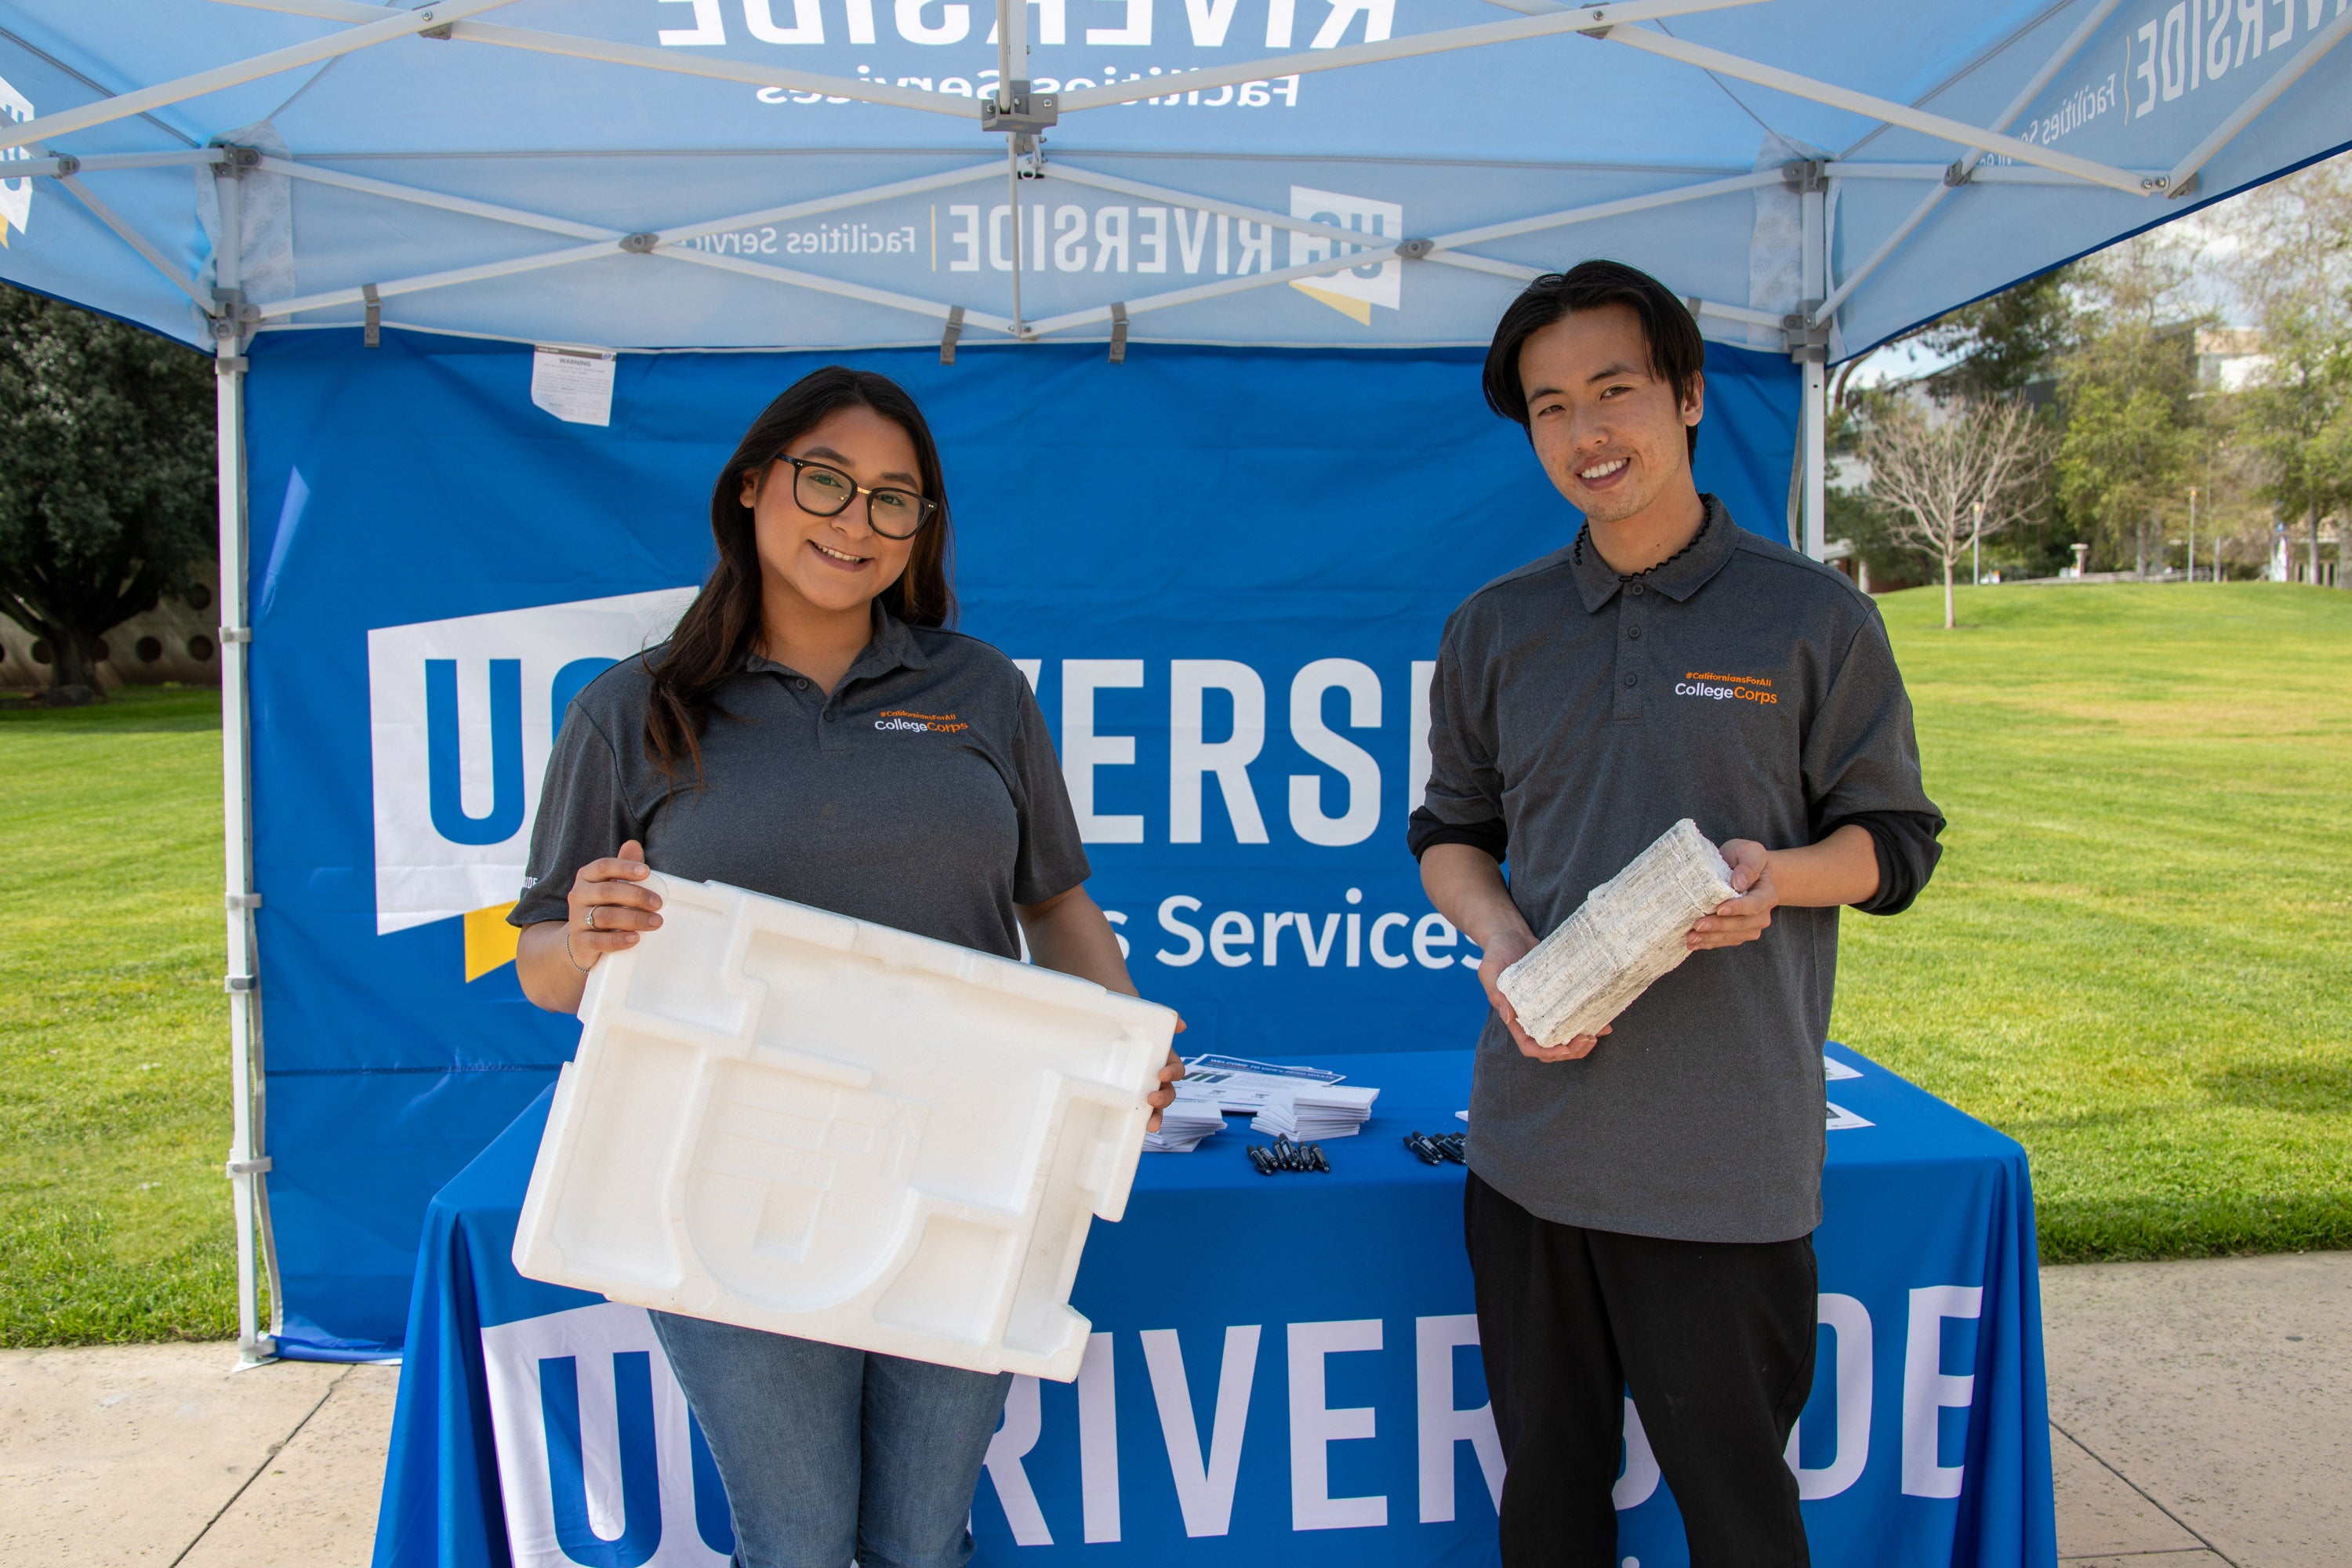 Two people at an event table holding Styrofoam meant for recycling